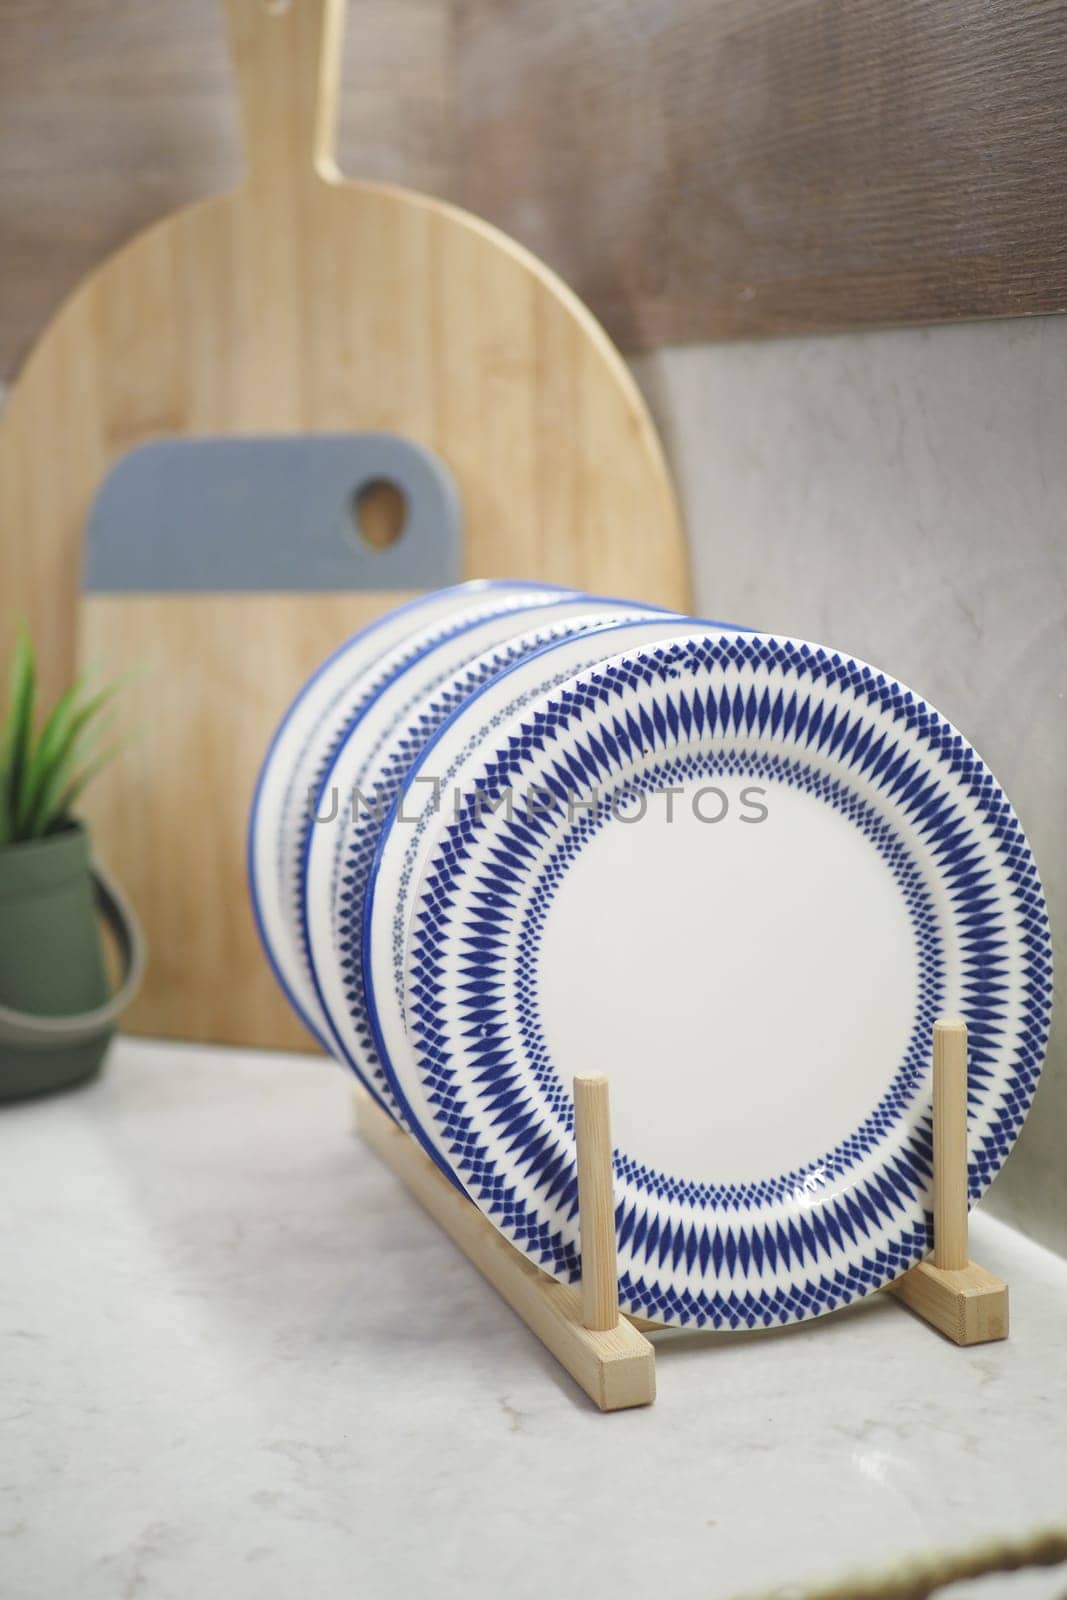 round bowl or ceramic plate on kitchen table